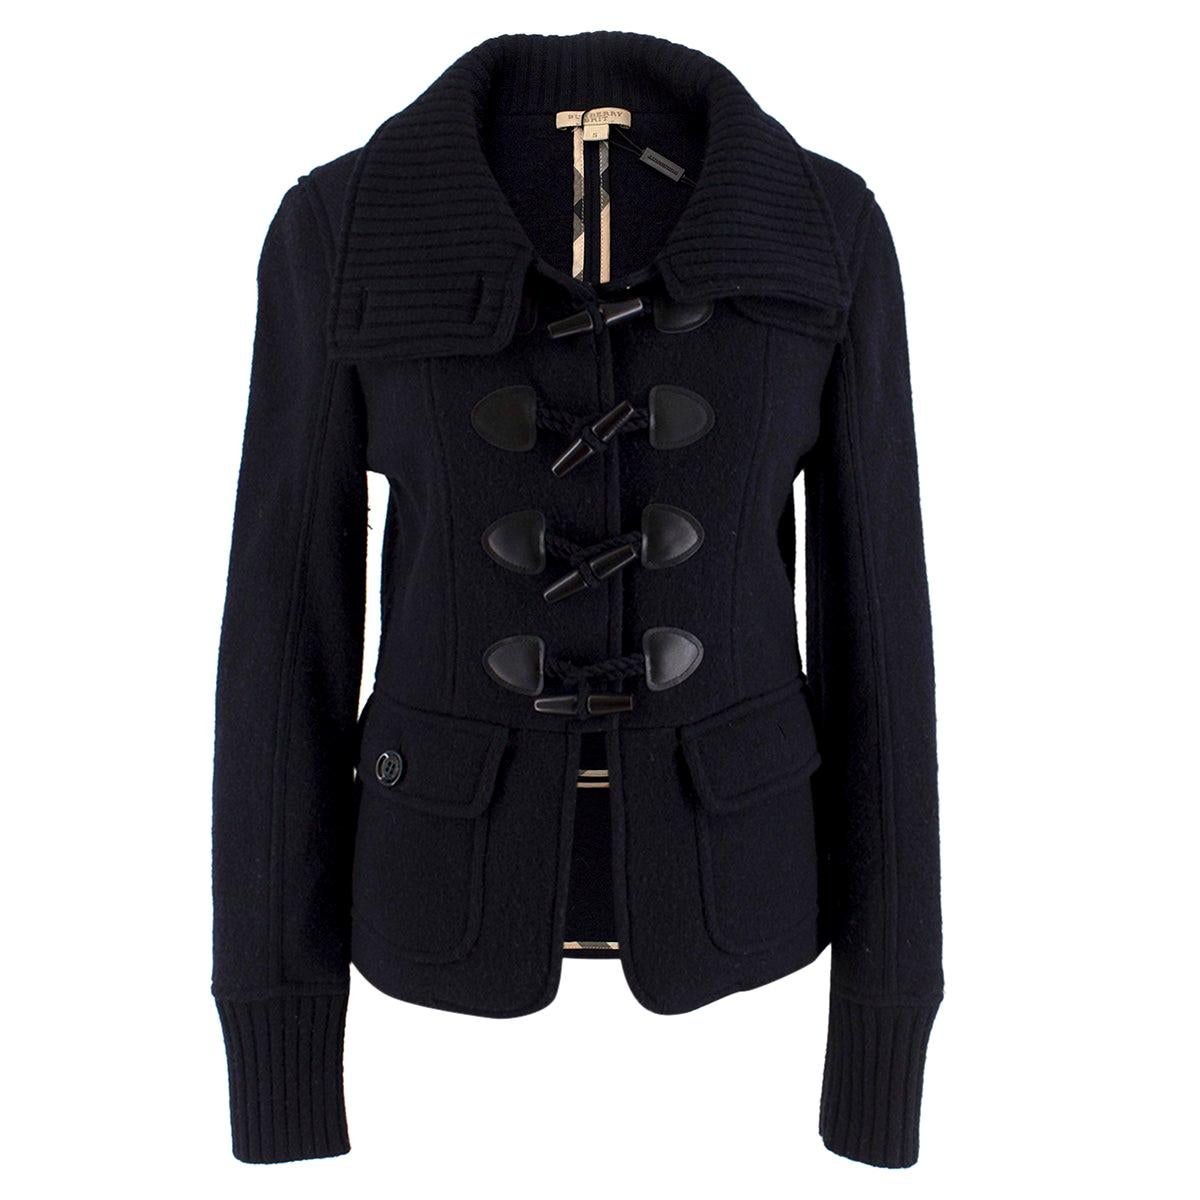 Burberry Brit Navy Blue Wool Toggle-Buttoned Knit Jacket S